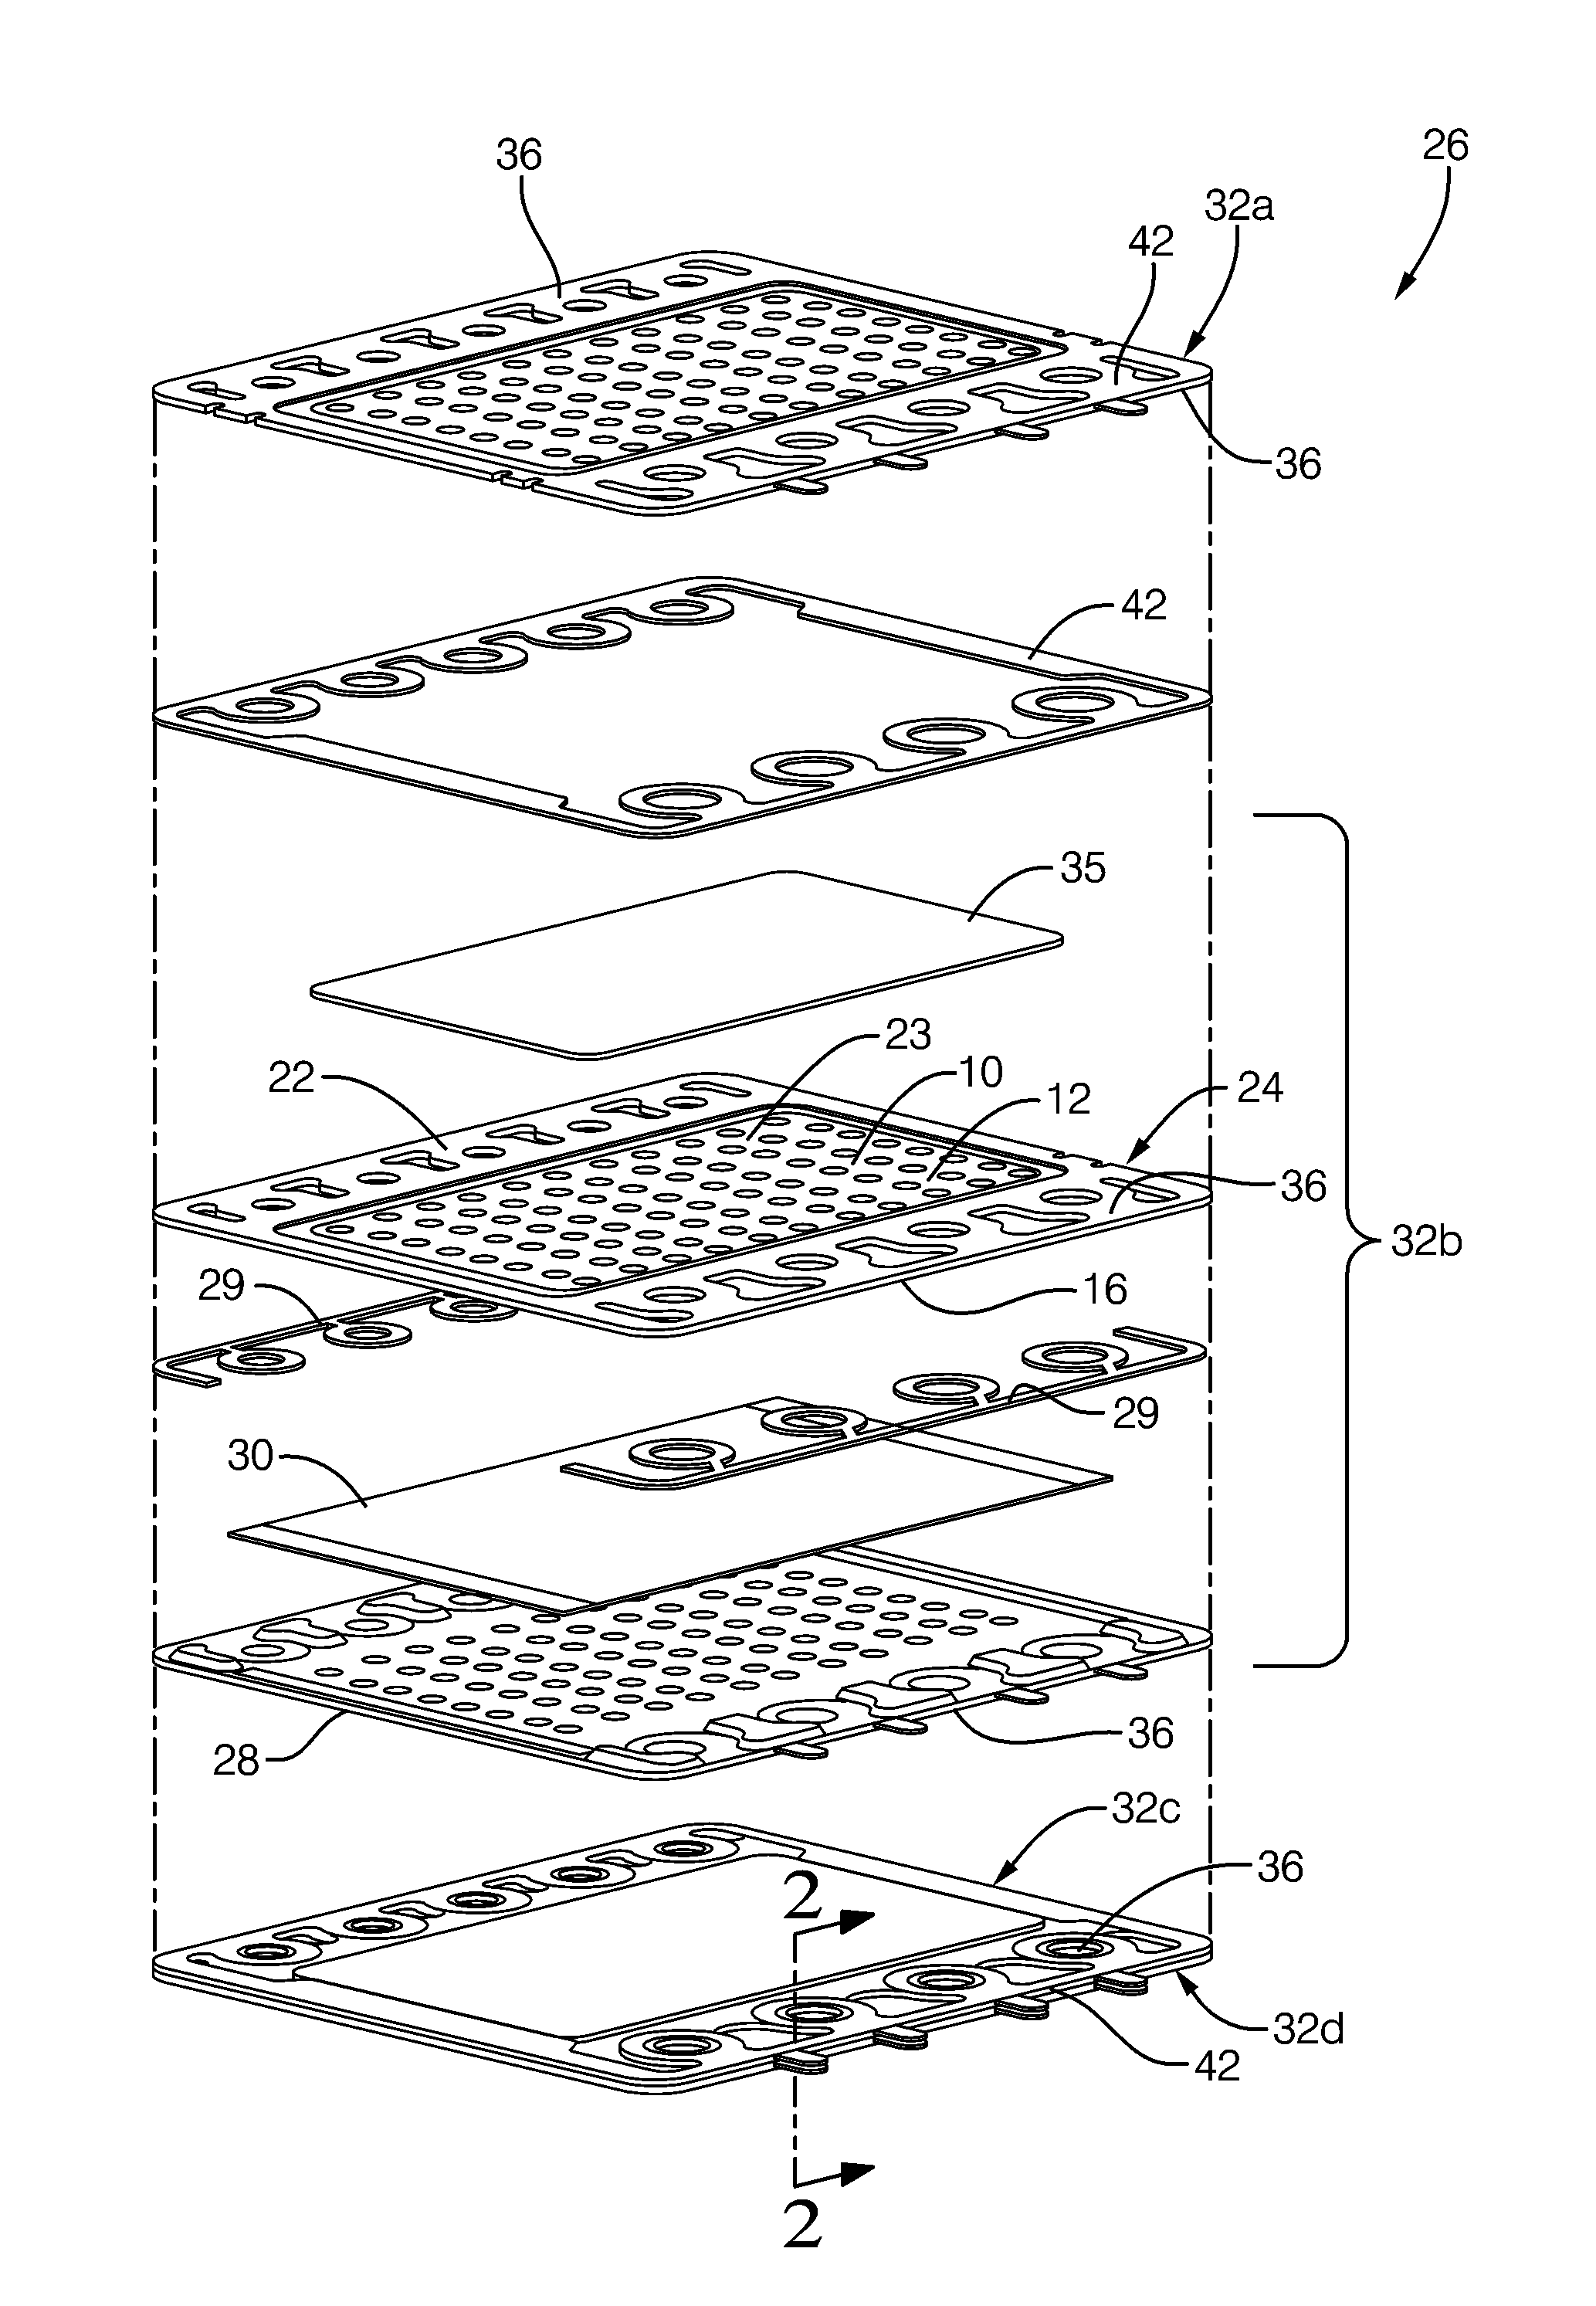 Solid oxide fuel cell having a glass composite seal